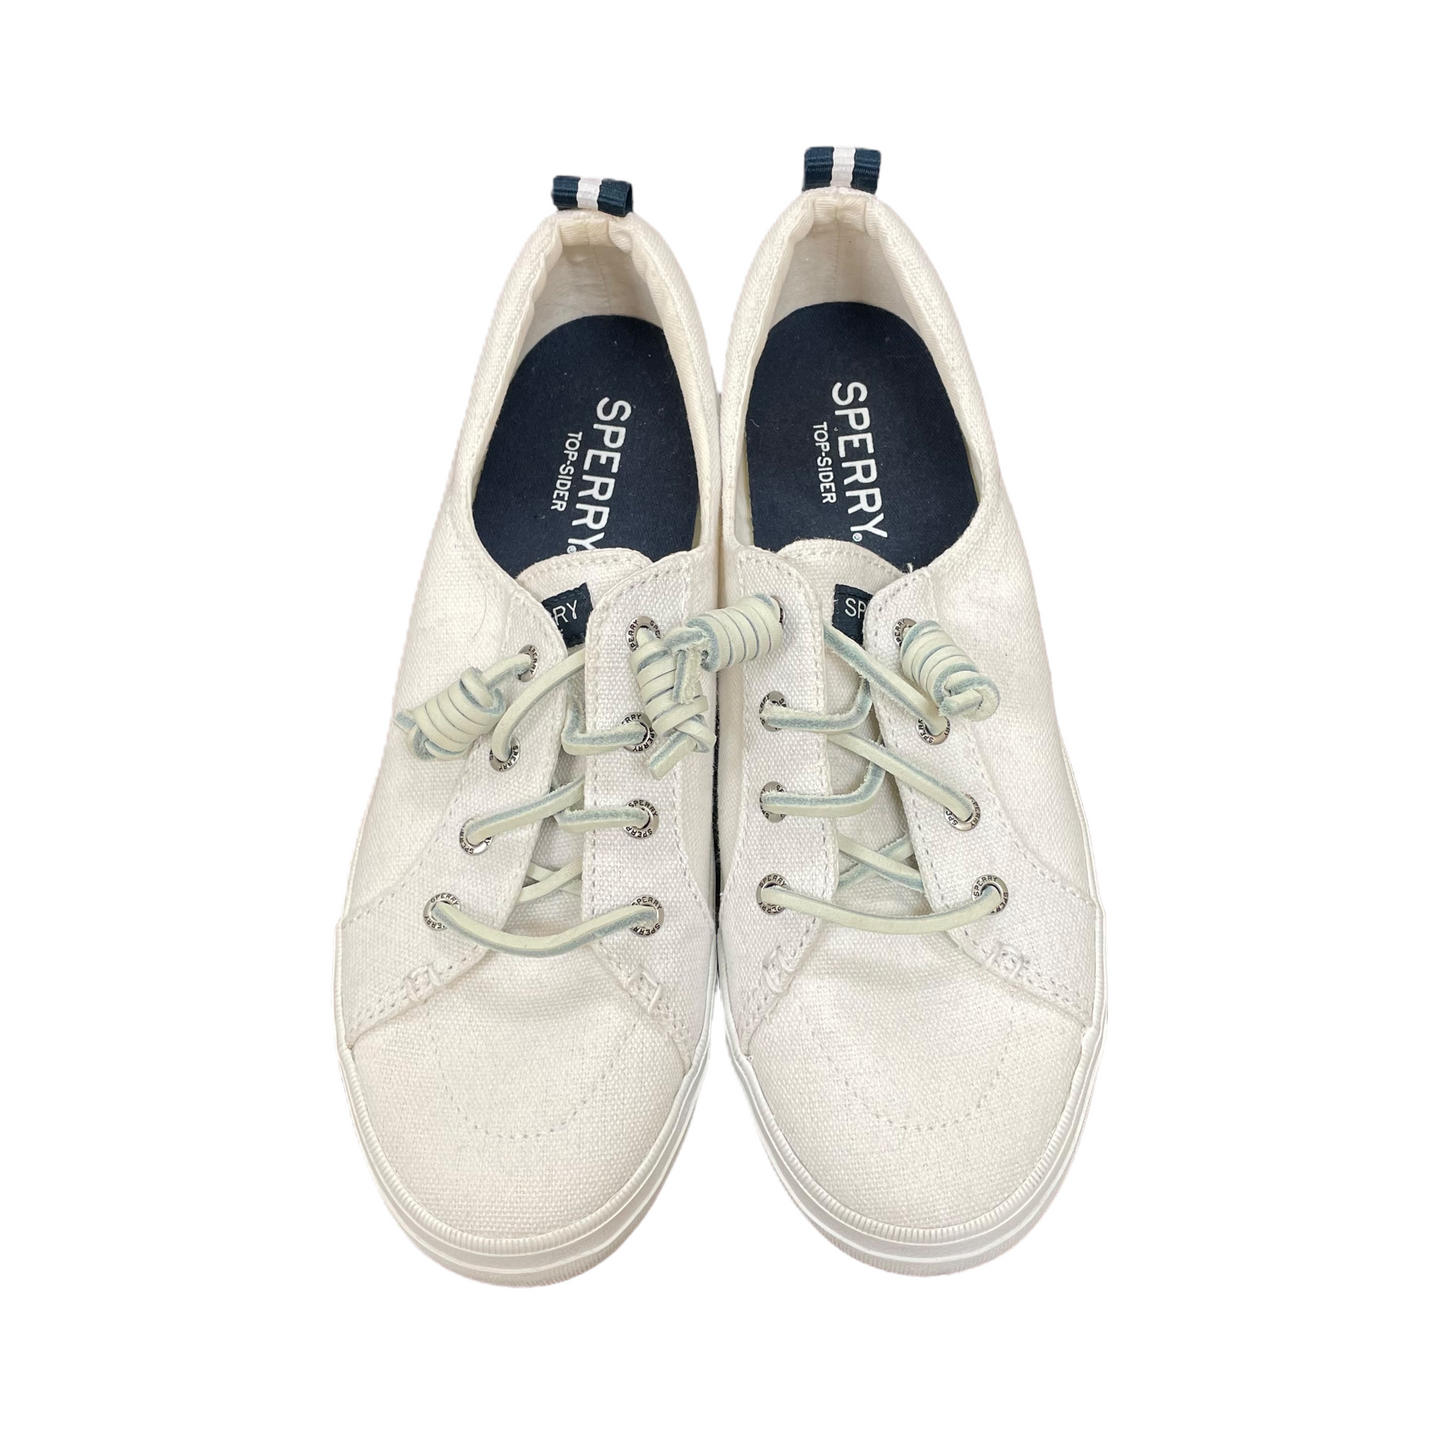 White Shoes Flats Boat By Sperry, Size: 7.5